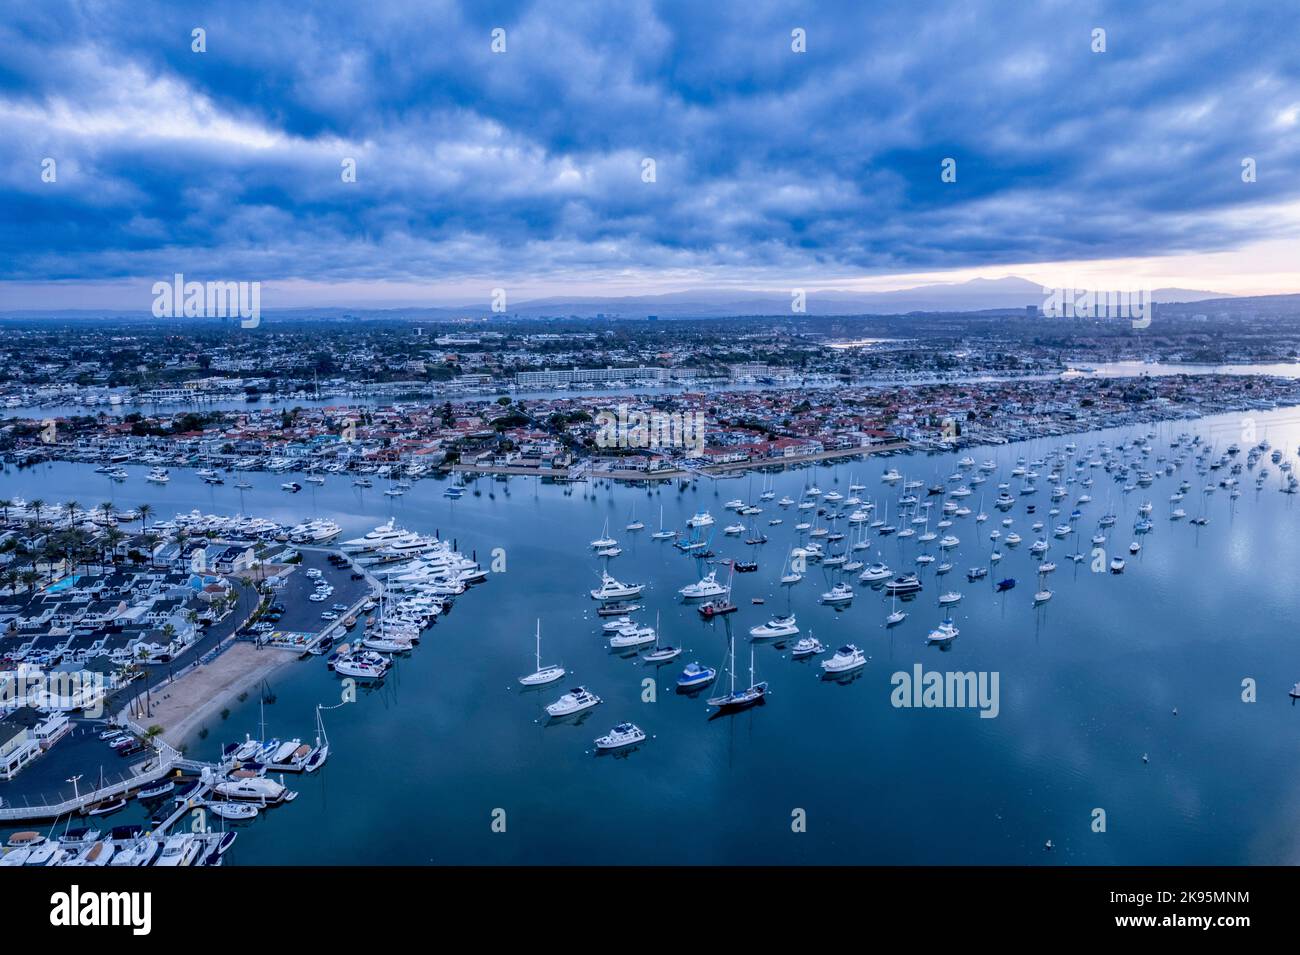 An aerial landscape view of Newport Beach, Orange County with aligned boats and ships, California Stock Photo